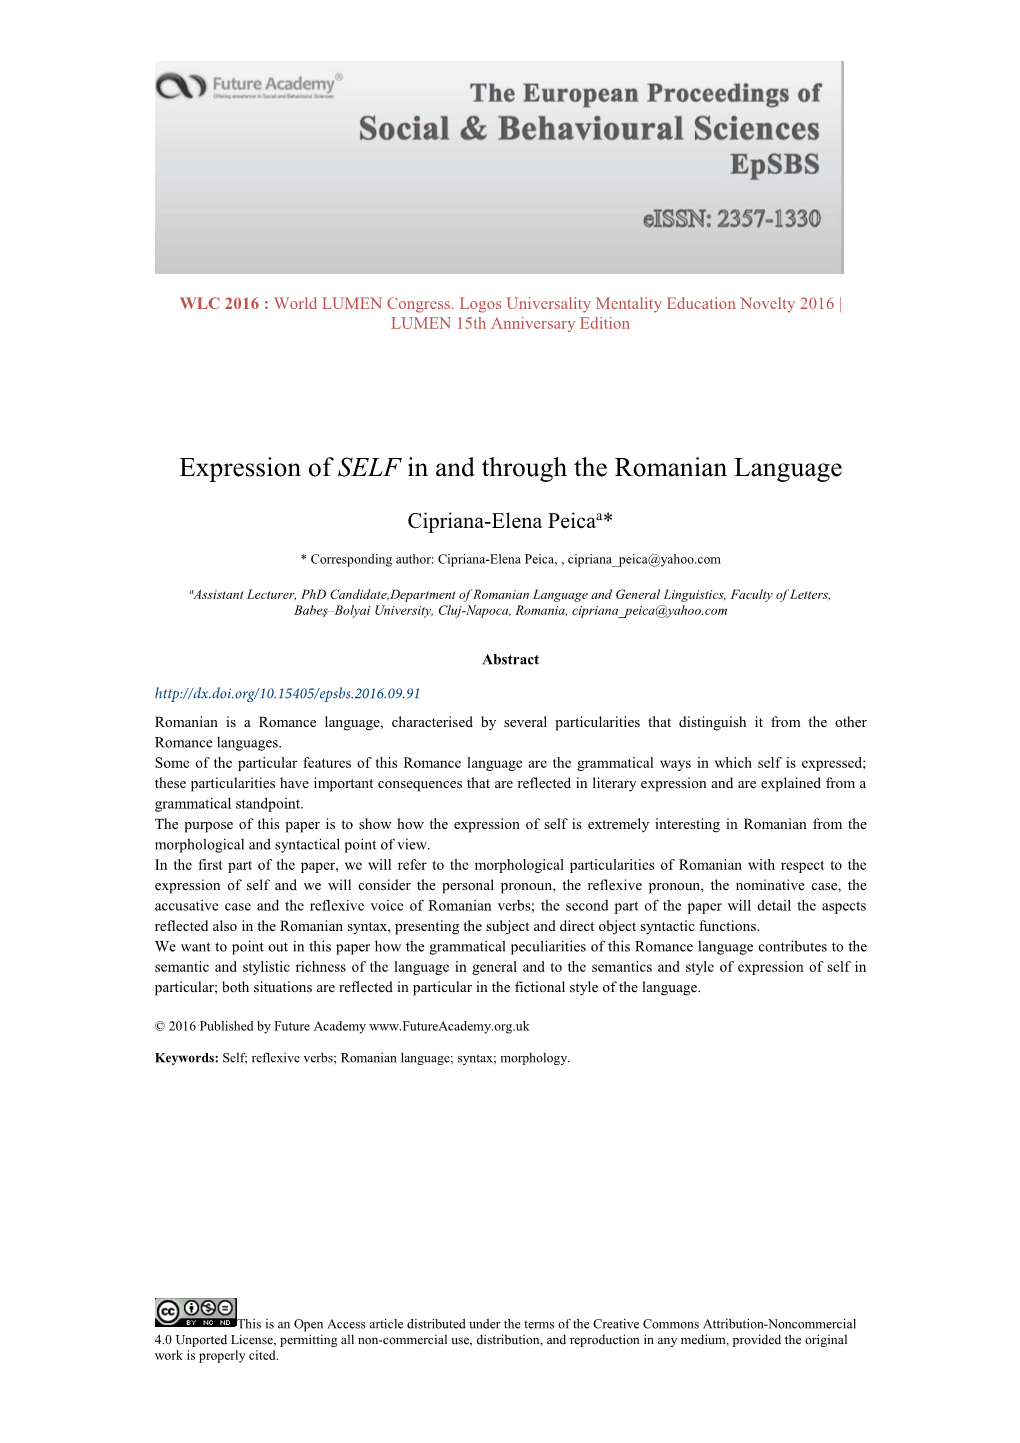 Expression of SELF in and Through the Romanian Language